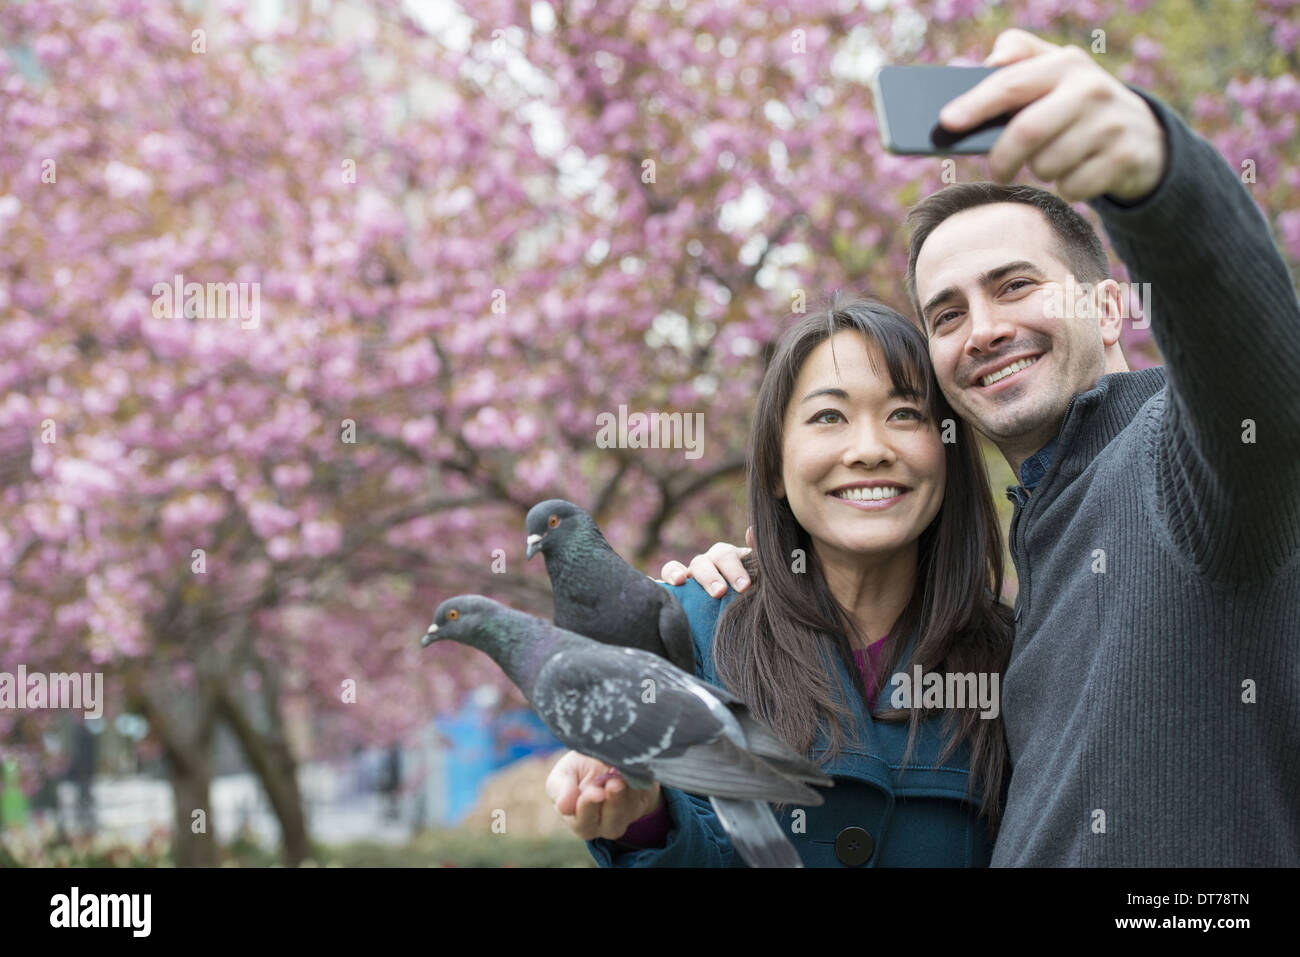 A couple, a man and woman, in the park, taking a selfy, self portrait with a mobile phone. Two pigeons perched on her wrist. Stock Photo